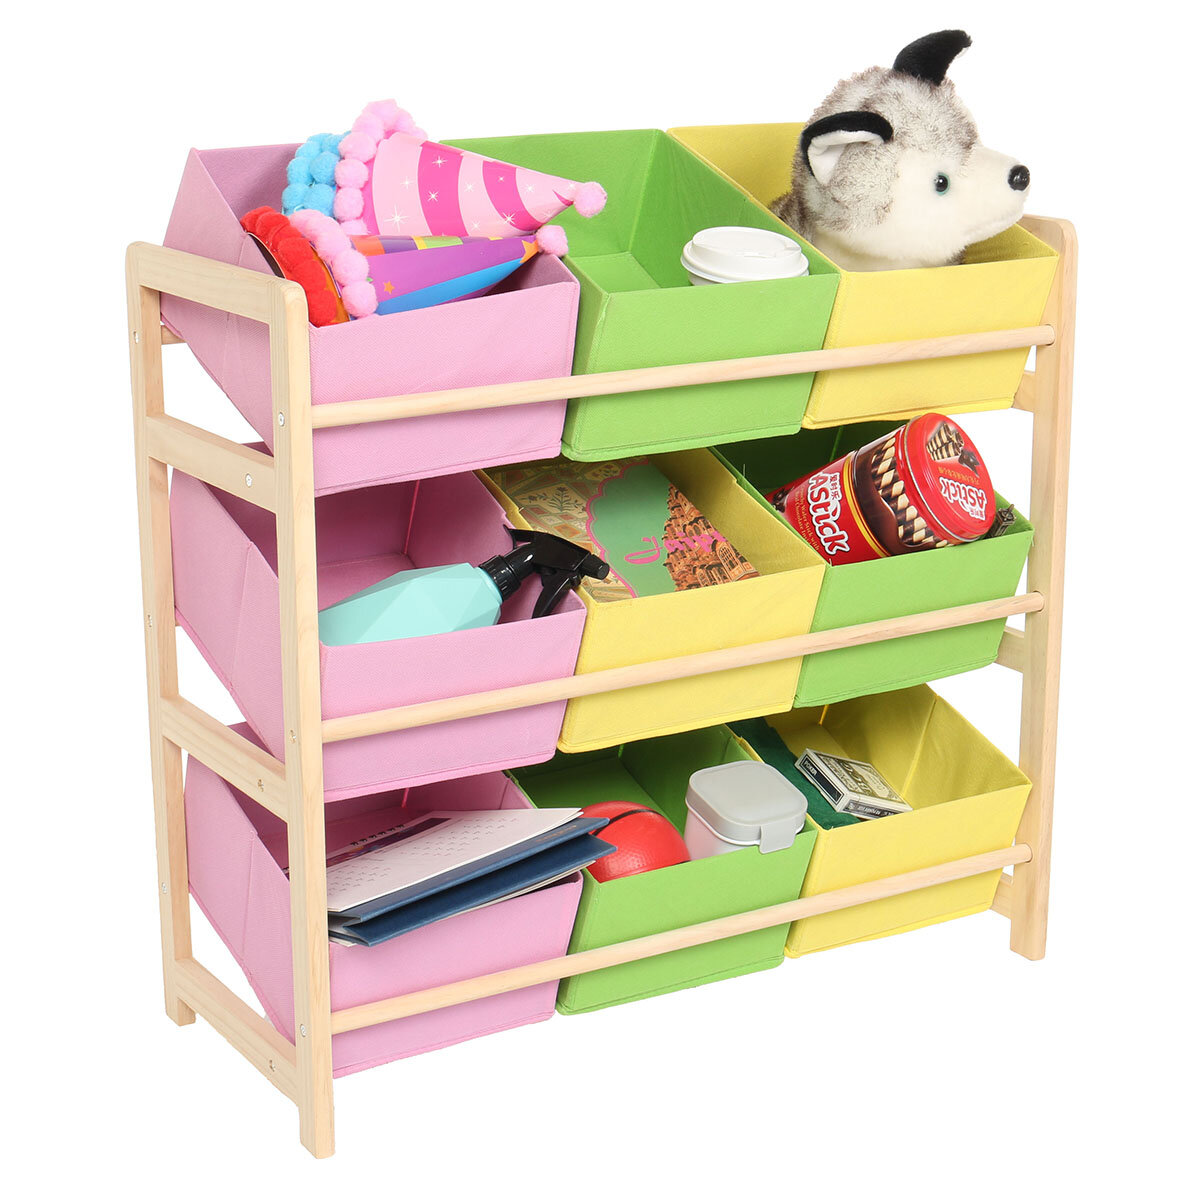 Image of 66*30*9CM Yellow Pink Green Solid Wood Children's Toy Rack Storage Rack Toy Rack